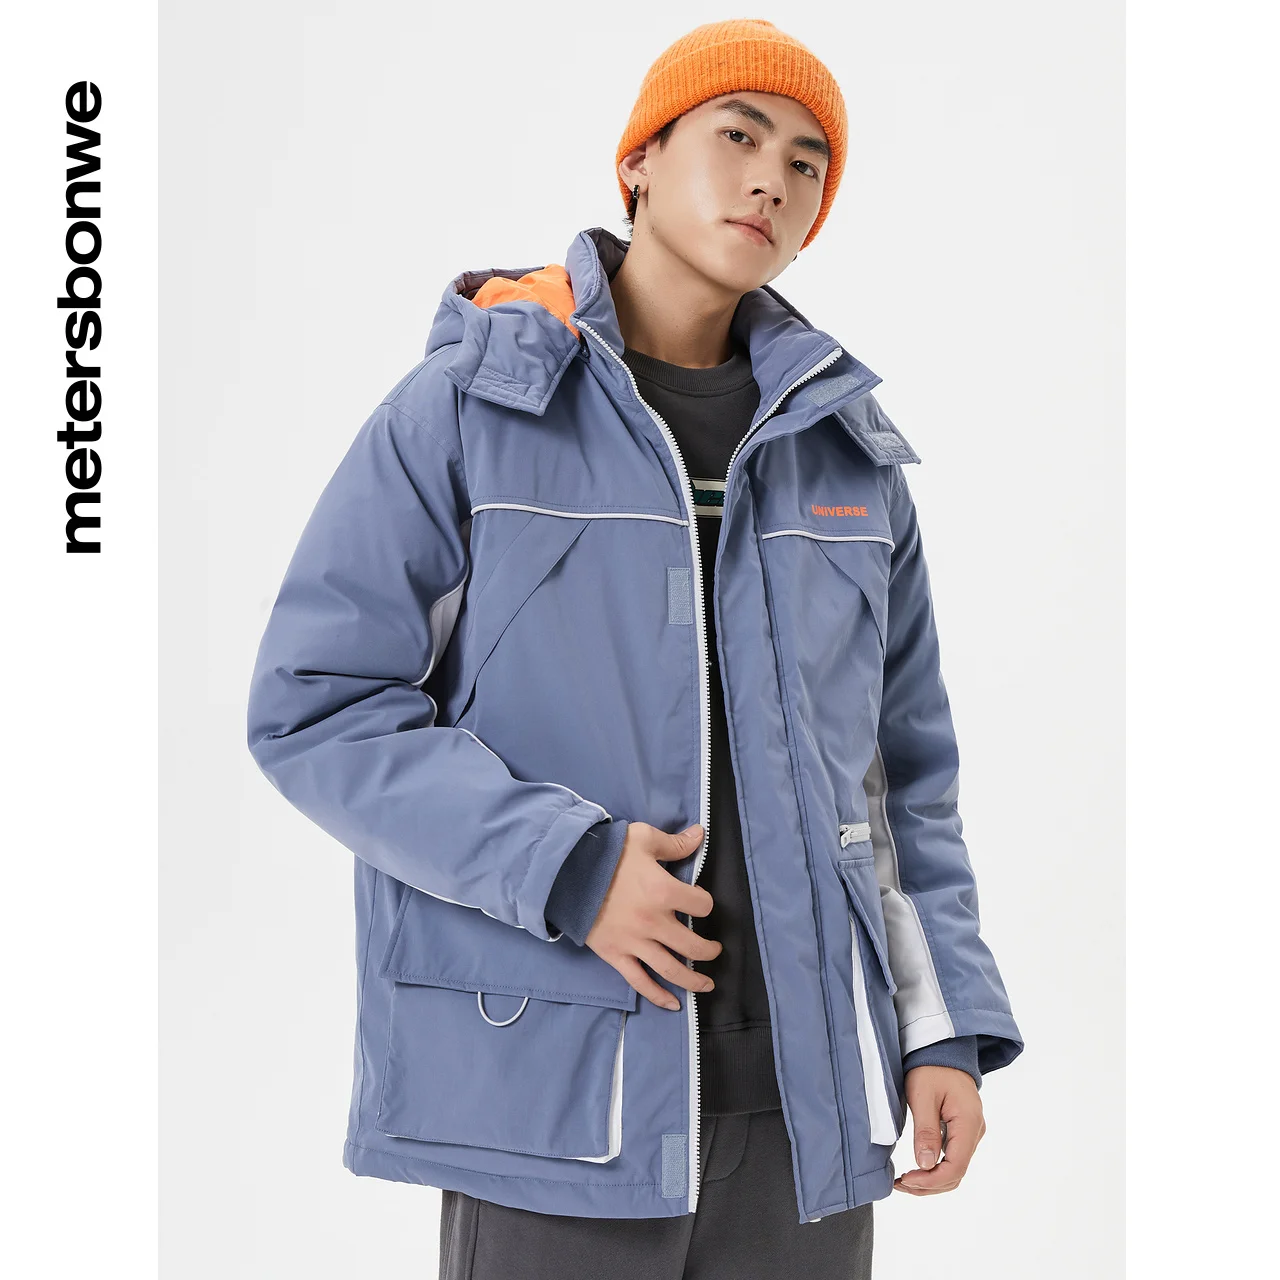 Metersbonwe Hooded Contrast Panel Cargo Down Jacket Men Winter New Thick Outerweart Warm Down Coat Brand Jackets Fashion Coats